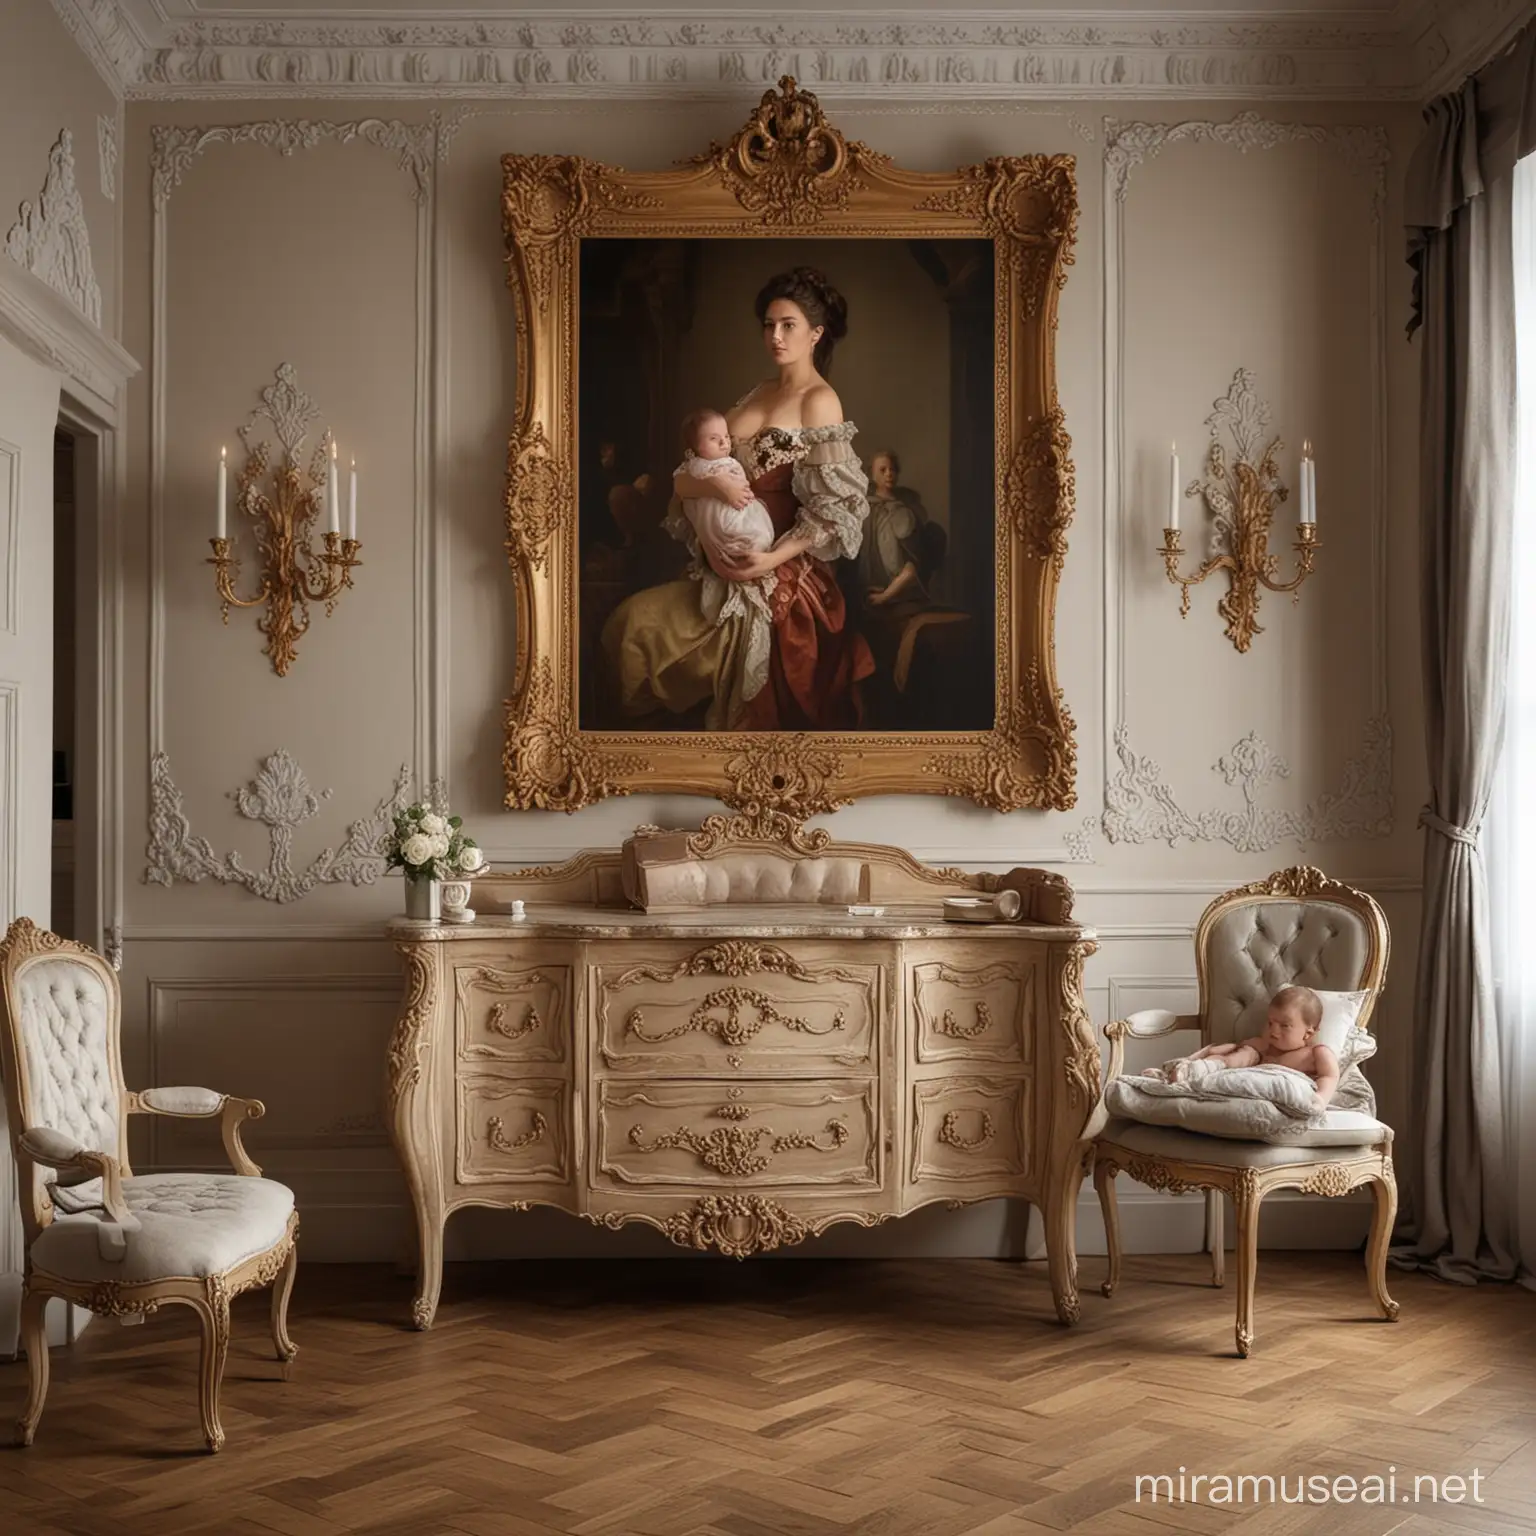 Baroque Style Mother Holding Baby in Lavishly Decorated Room